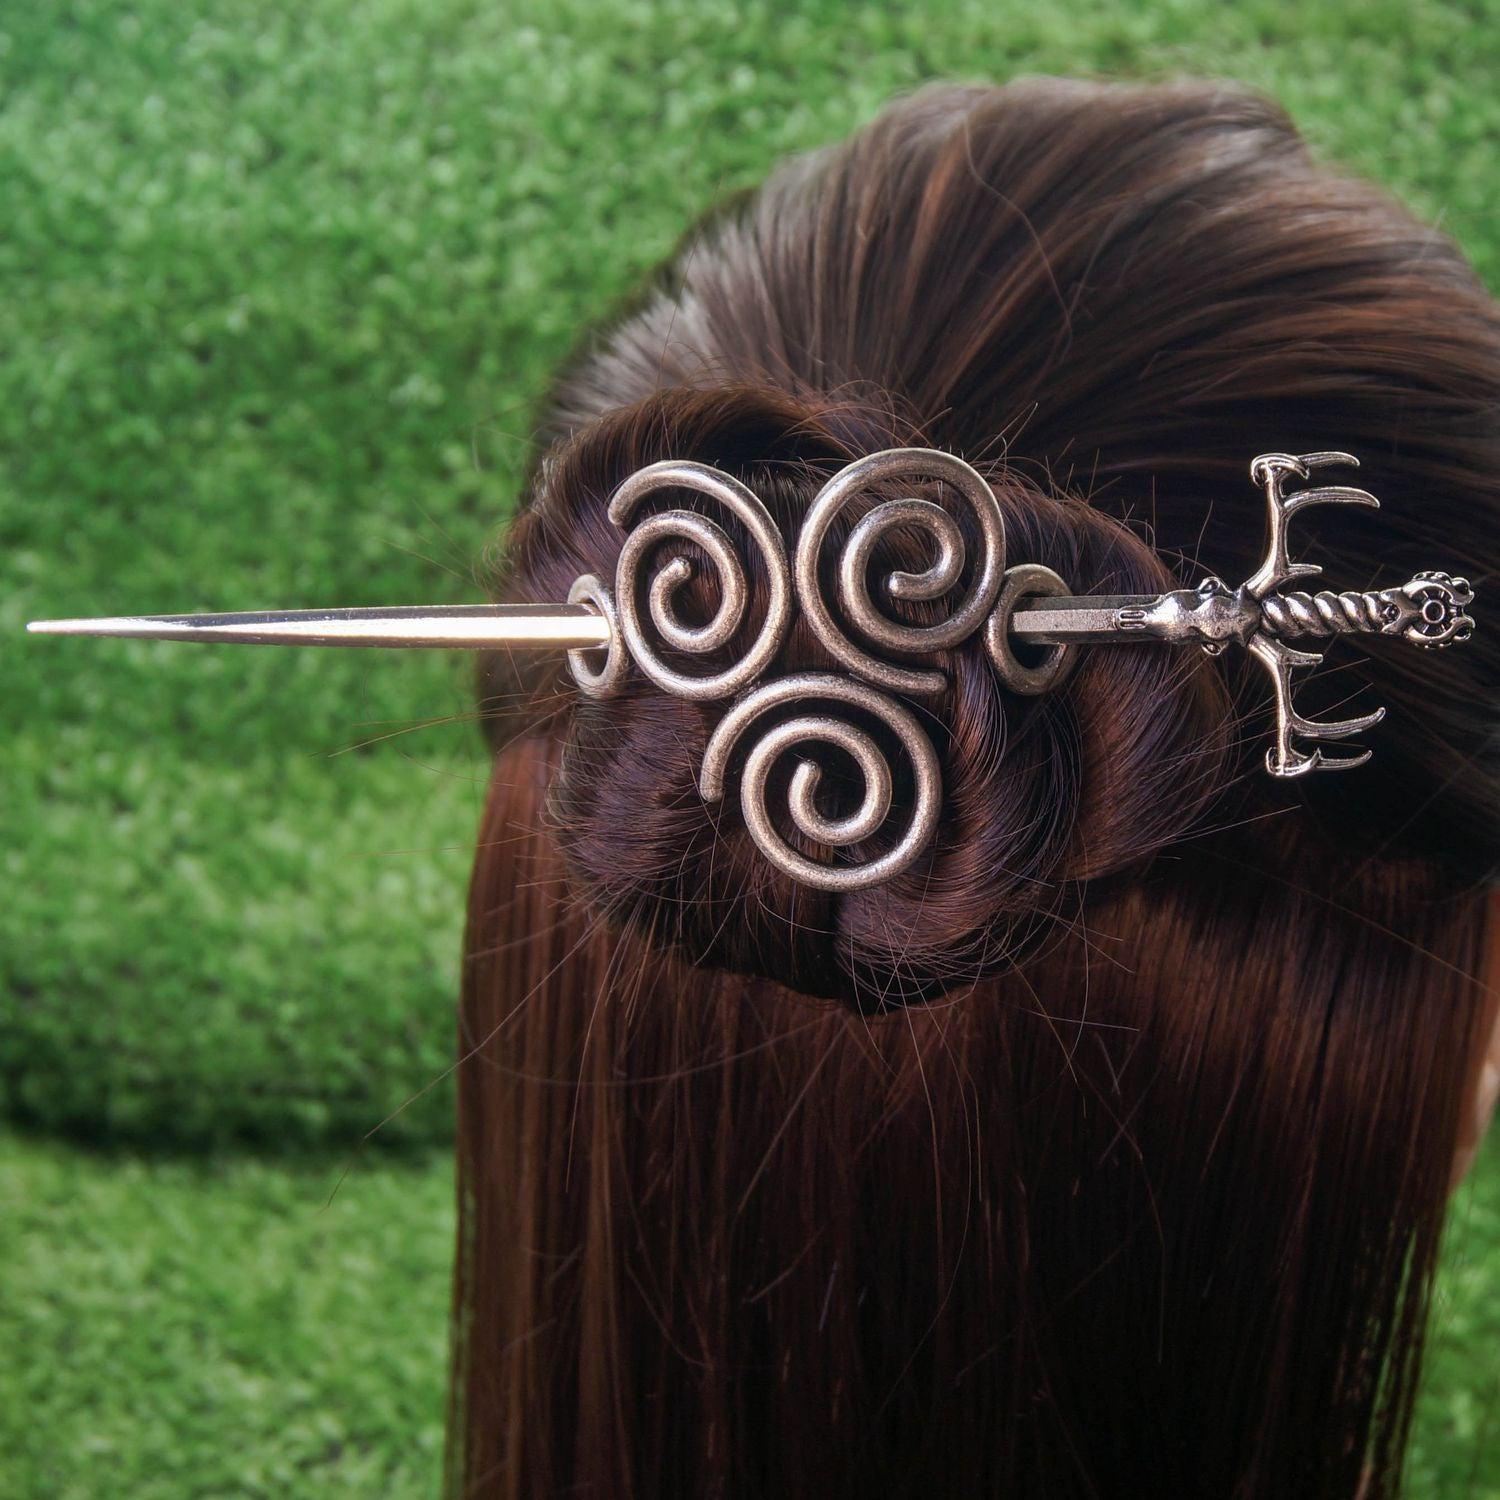 Triskele Hairpin Wicca pagan Hair Accessories-MoonChildWorld